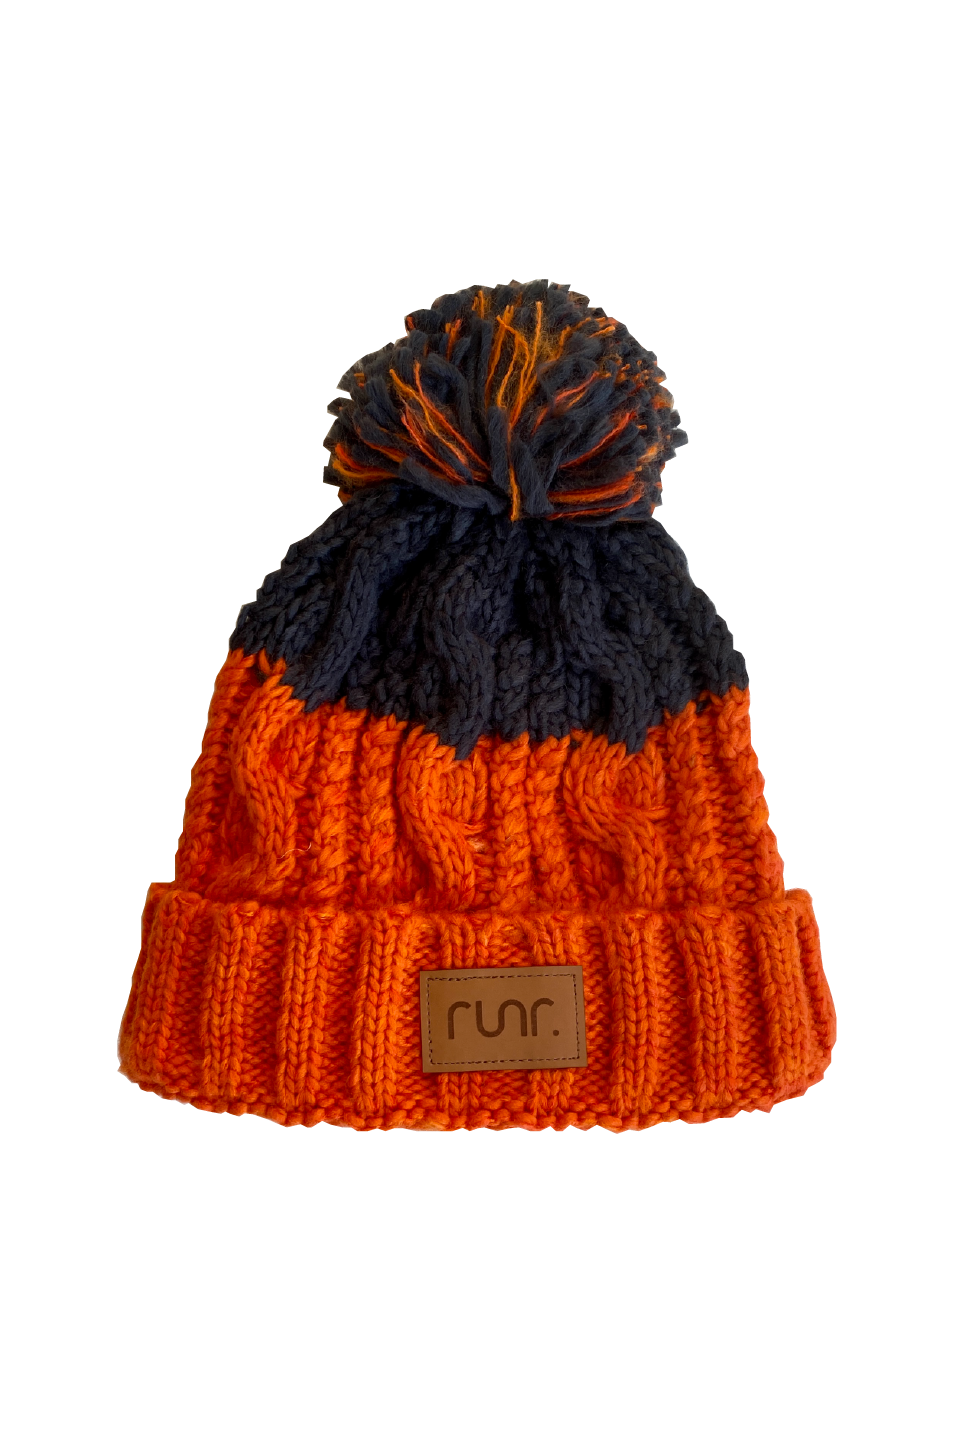 Runr Winter Bobble Hat - Conway